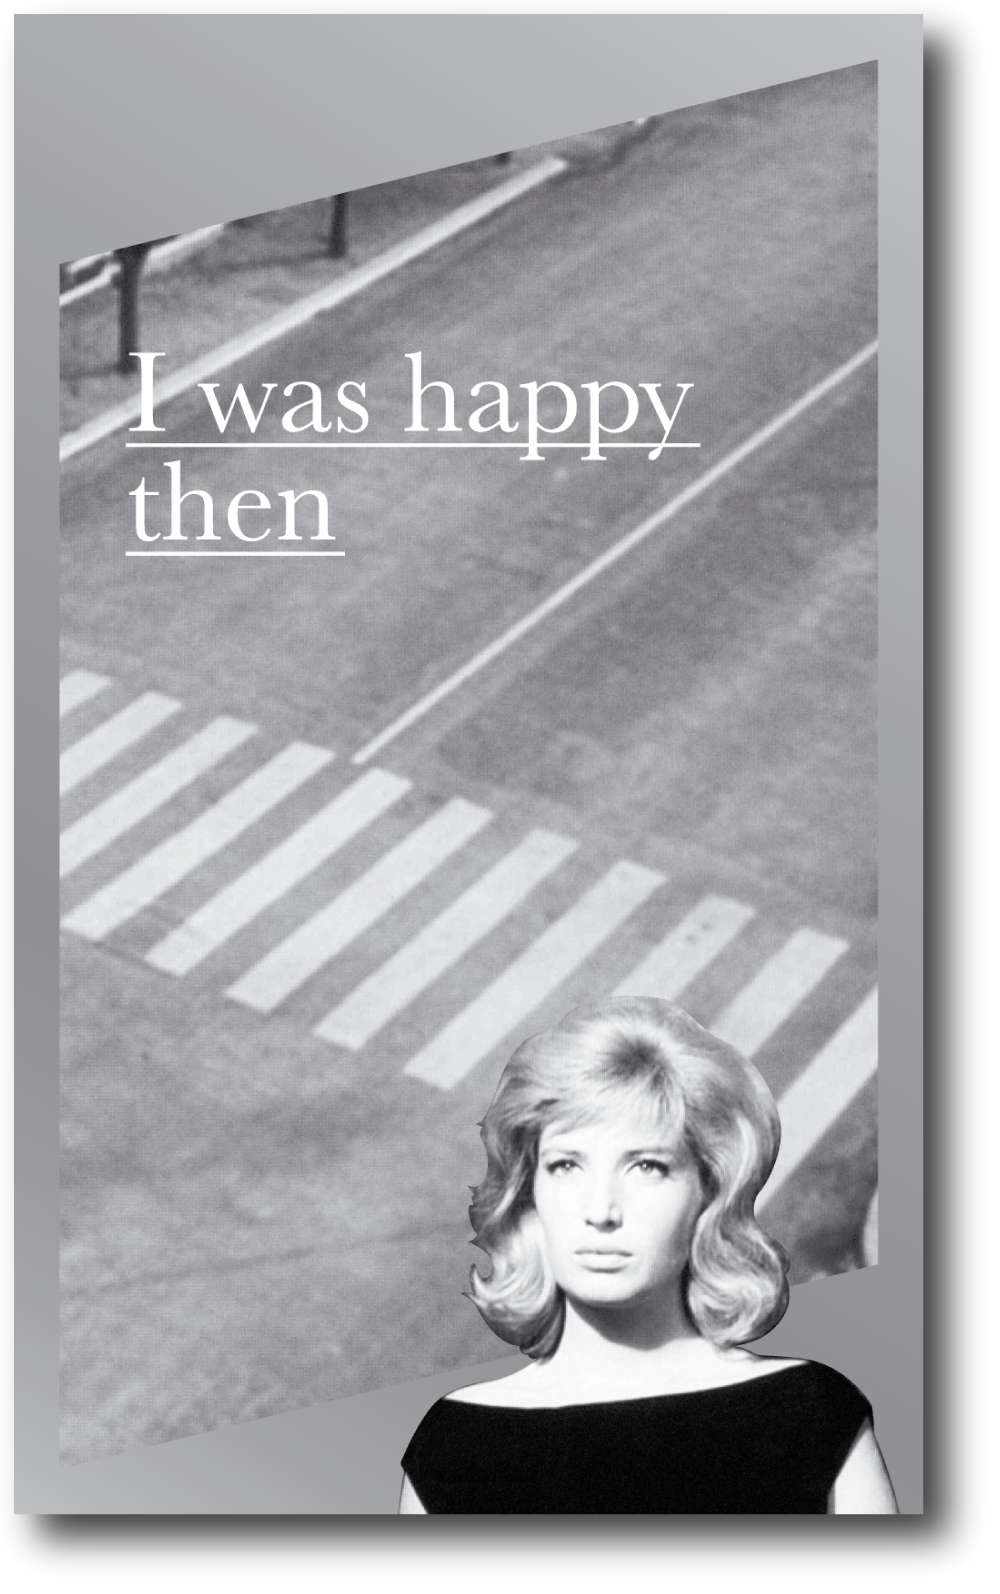   I was happy then , 2013,&nbsp;160 pages,&nbsp;8.25 x 5 inches. 